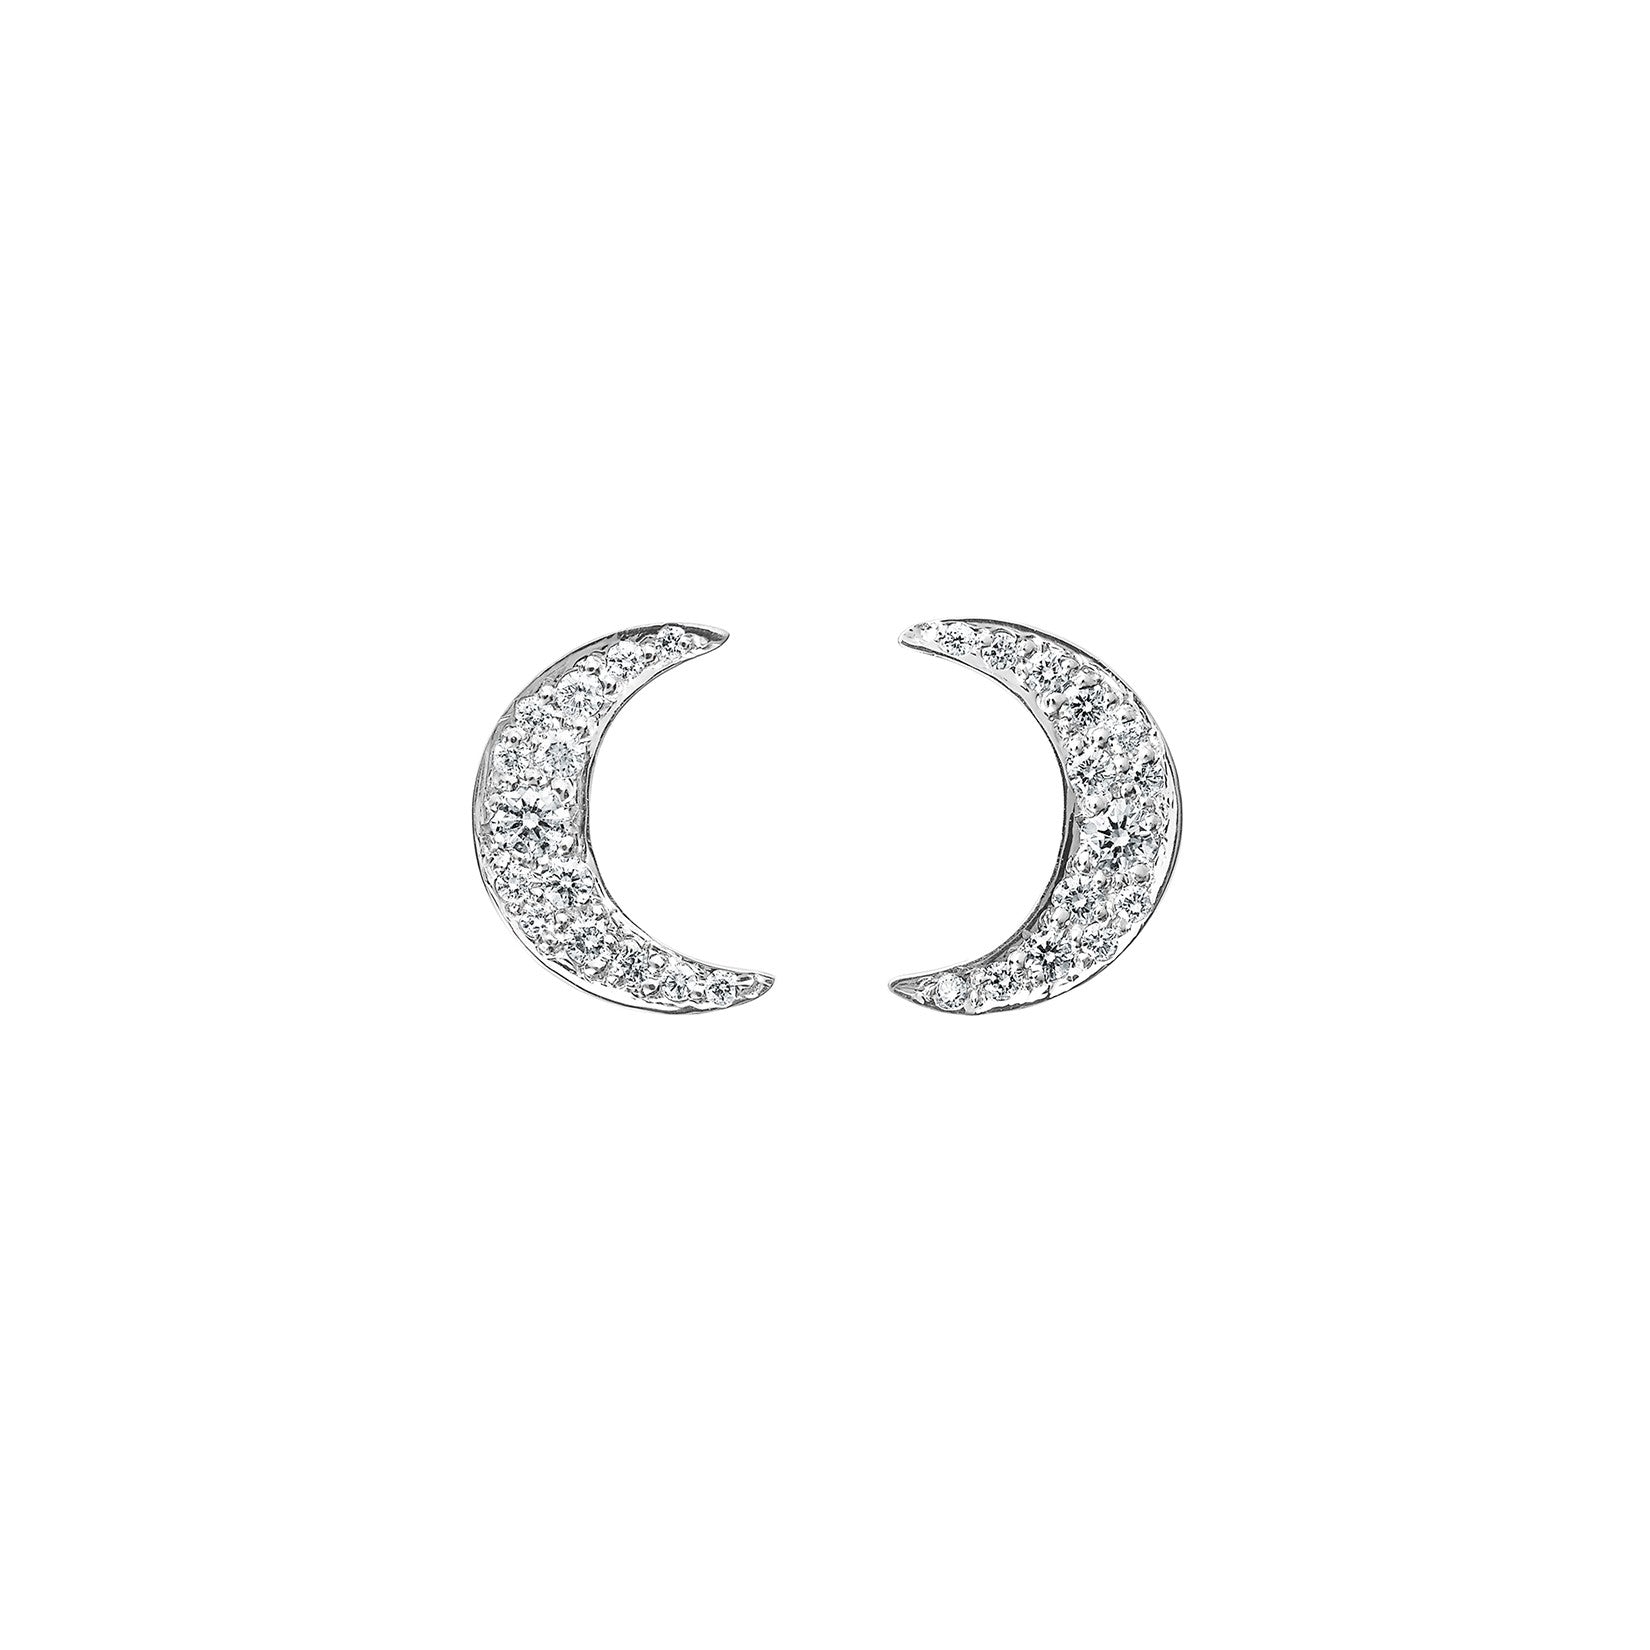 tiny simple diamond crescent moon earring studs in 18k white gold by finn by candice pool neistat